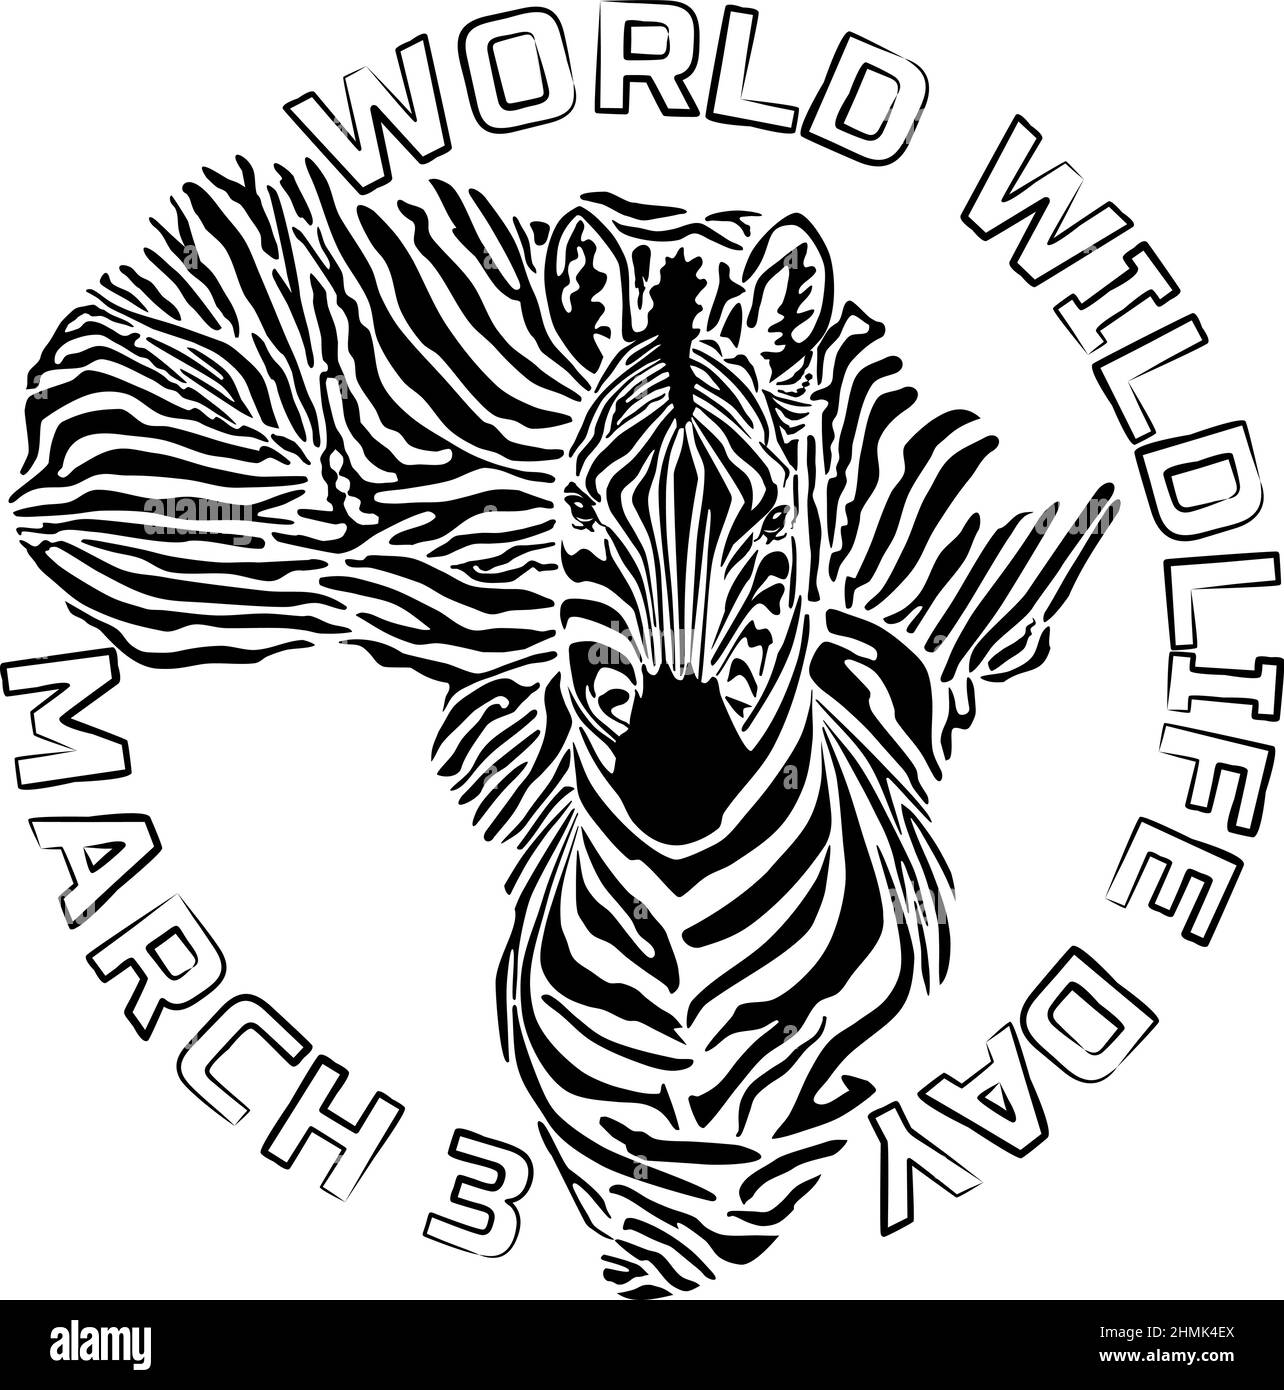 World Wildlife Day - a day that is important for the environment Stock Vector